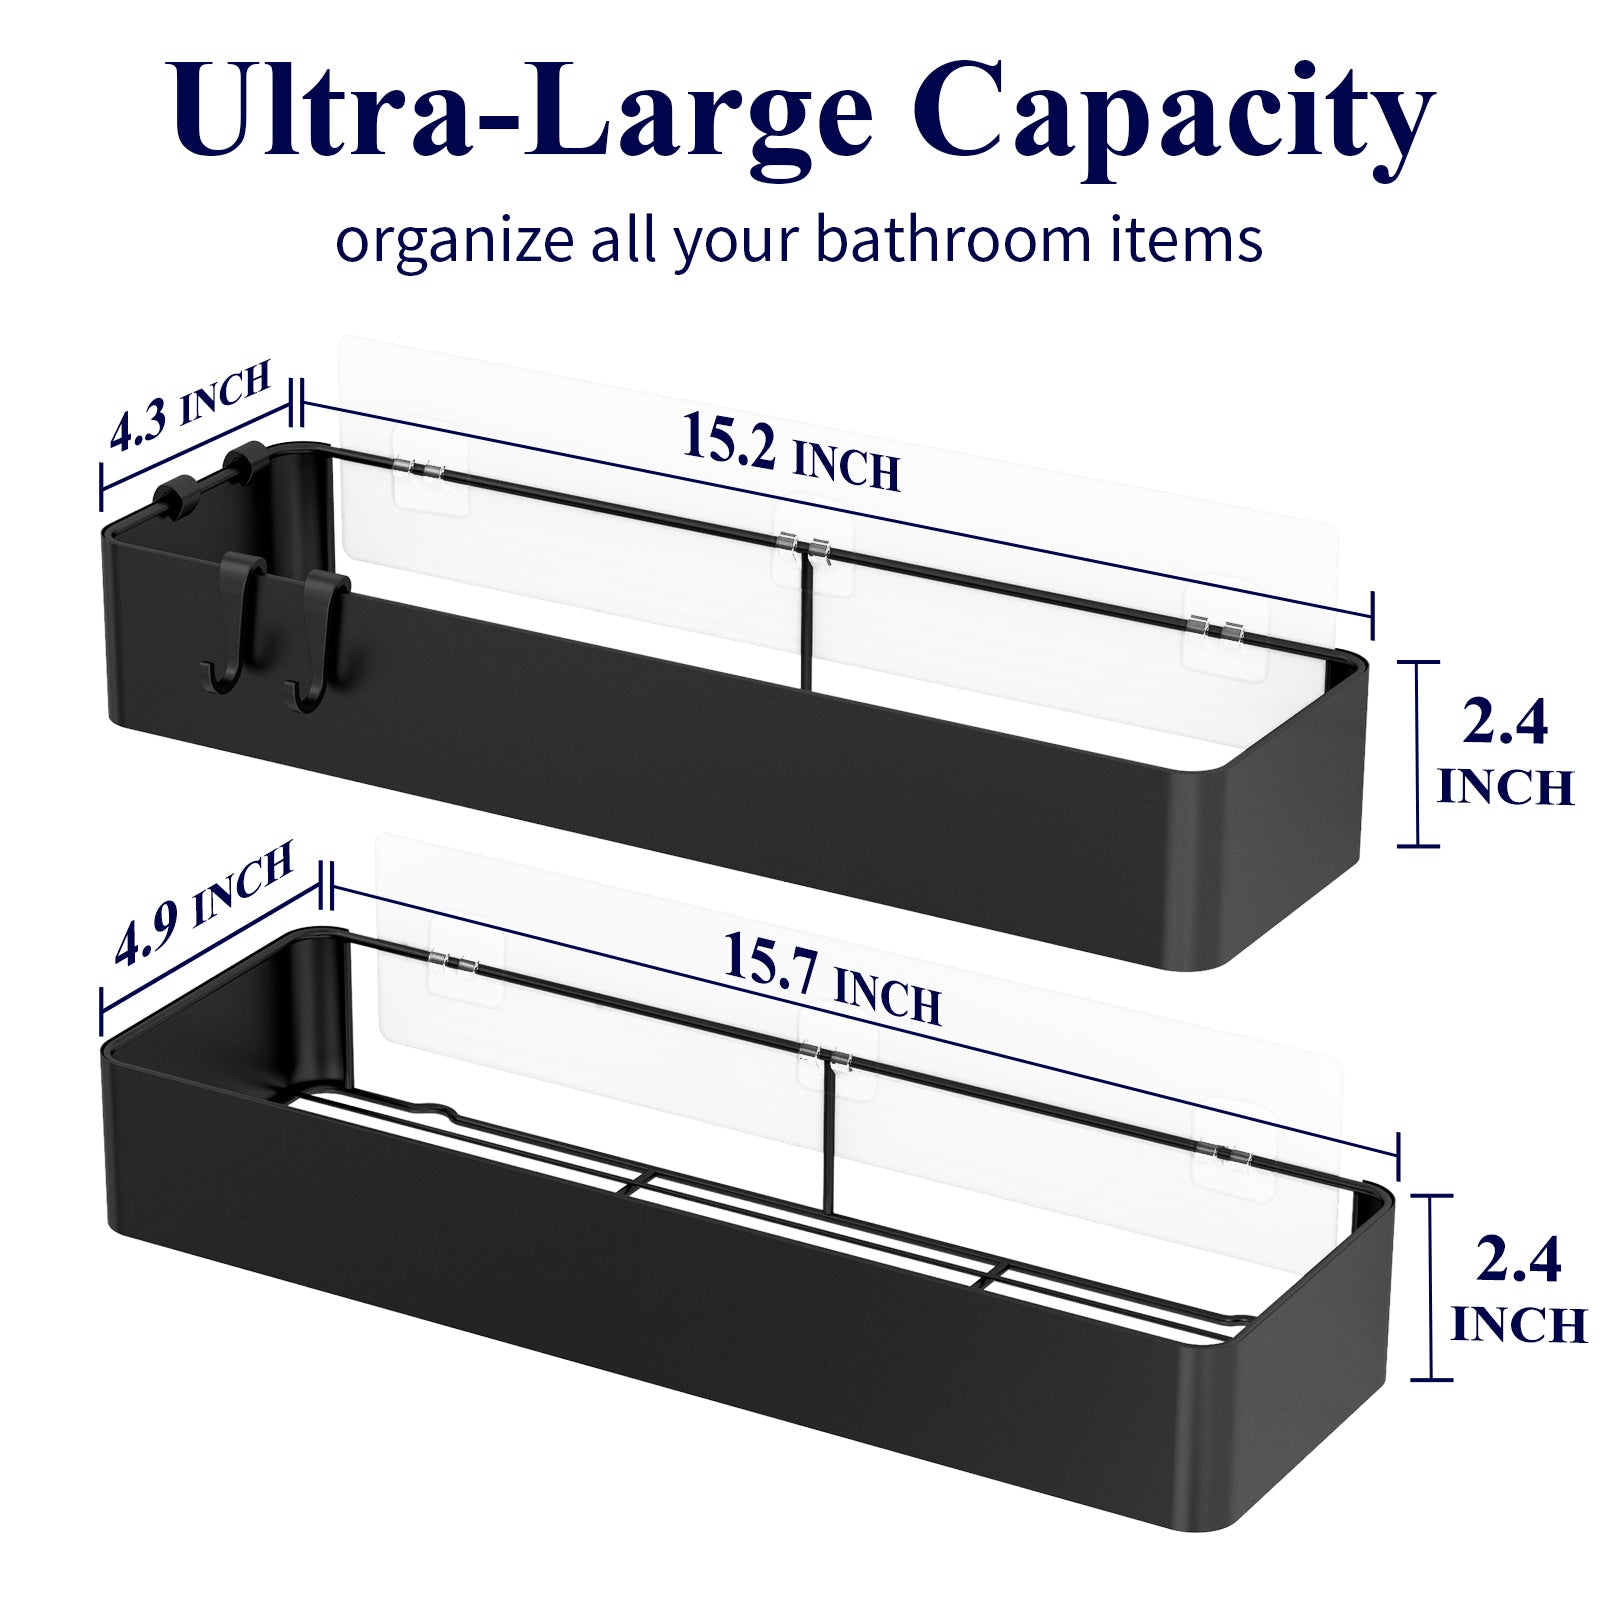 Cucino Extra-Large Shower Caddy 2-Pack - 16-inch Rust-Resistant Black Shower Shelves for Inside Shower, Adhesive Organizer with 4 Removable Hooks